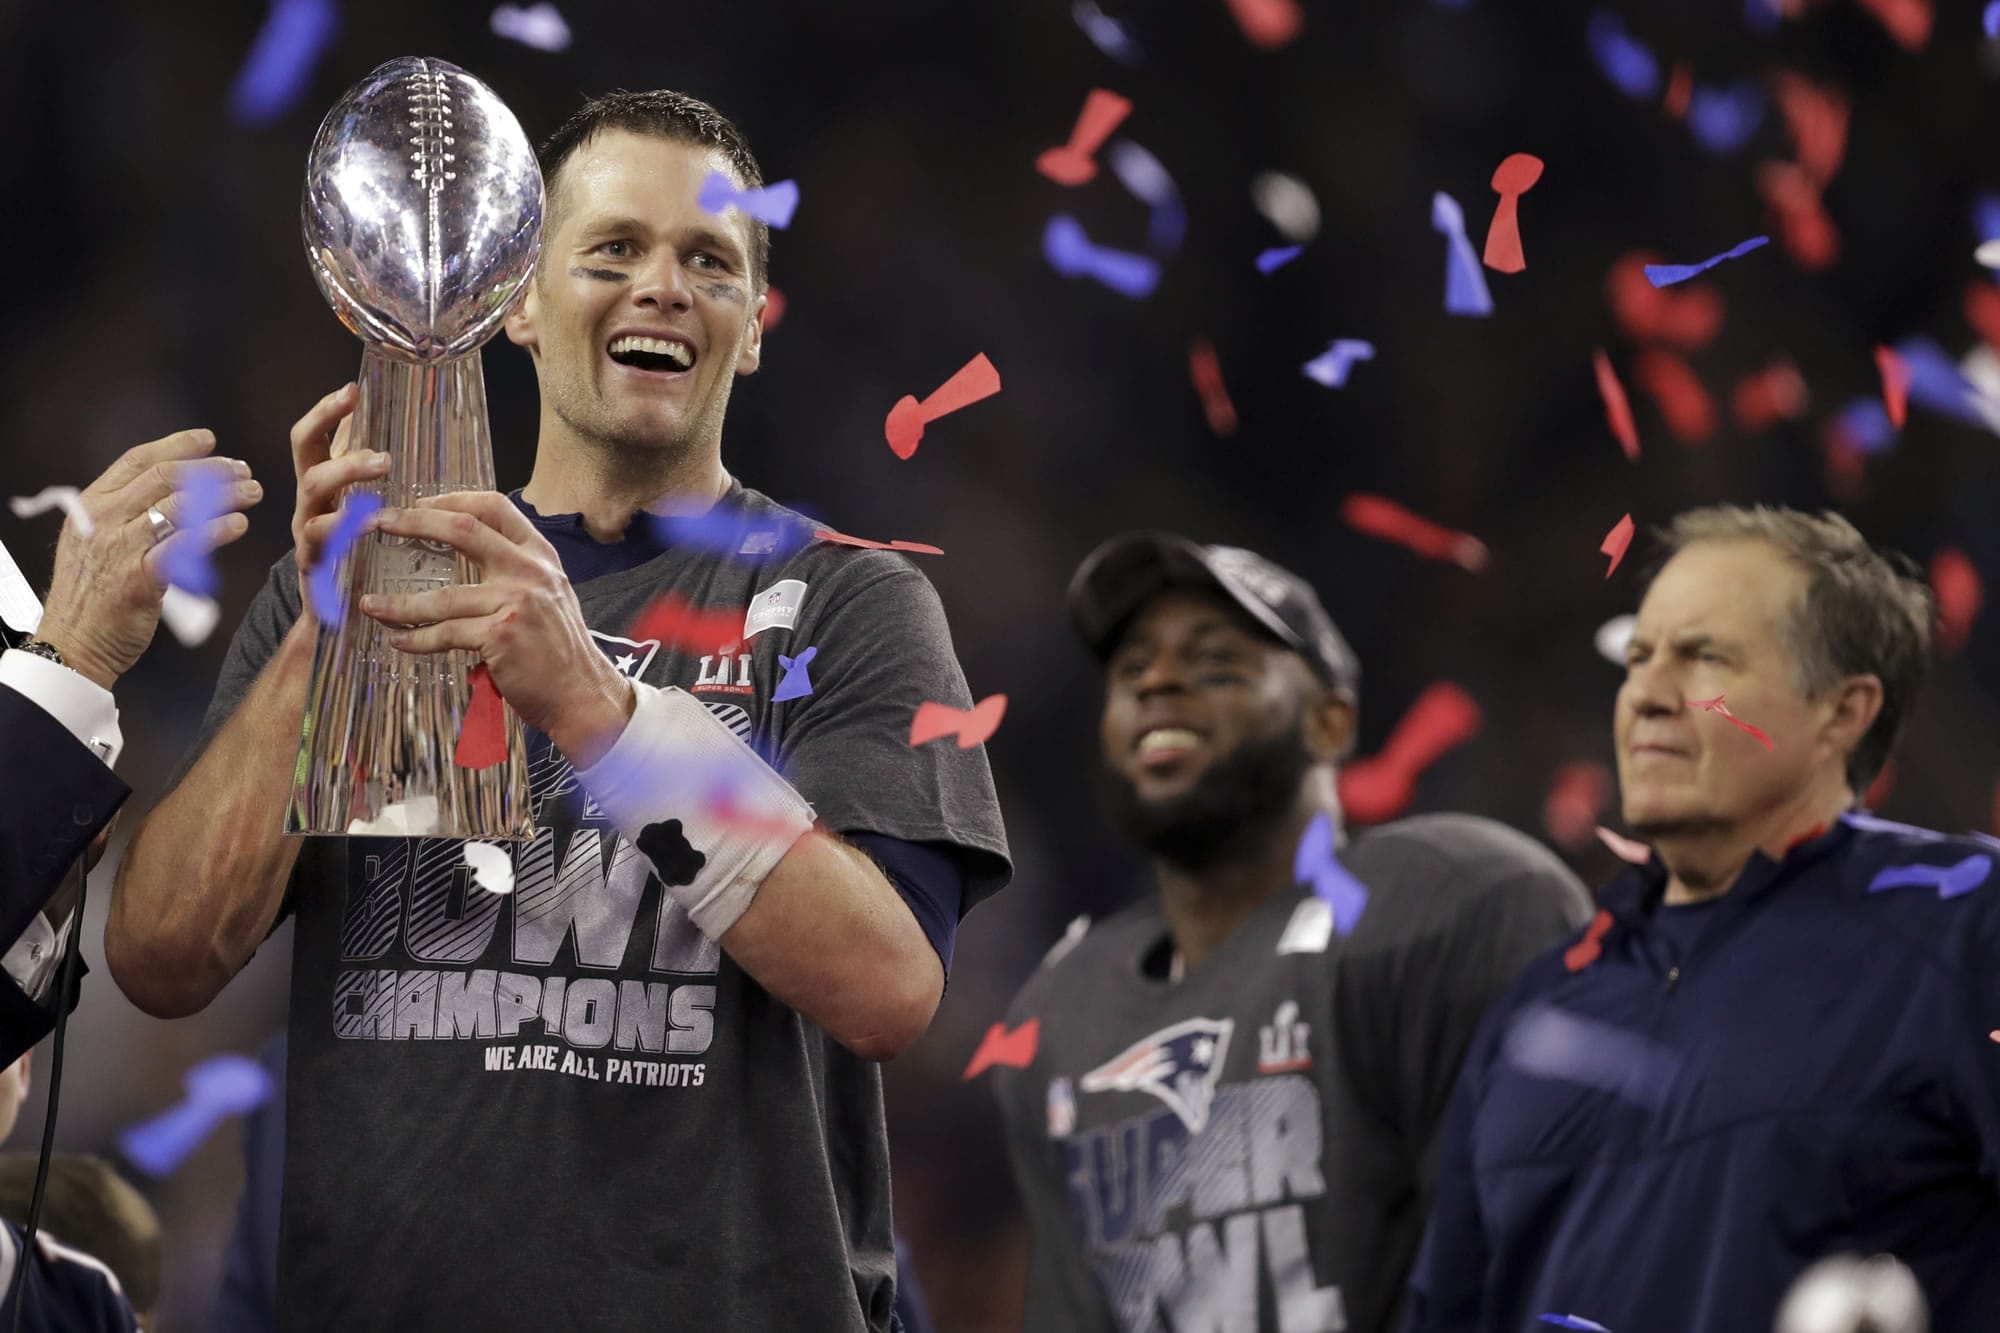 New England Patriots' Tom Brady holds the Vince Lombardi Trophy after defeating the Atlanta Falcons in overtime at the NFL Super Bowl 51 football game Sunday, Feb. 5, 2017, in Houston. The Patriots defeated the Falcons 34-28. At right is Patriots head coach Bill Belichick.